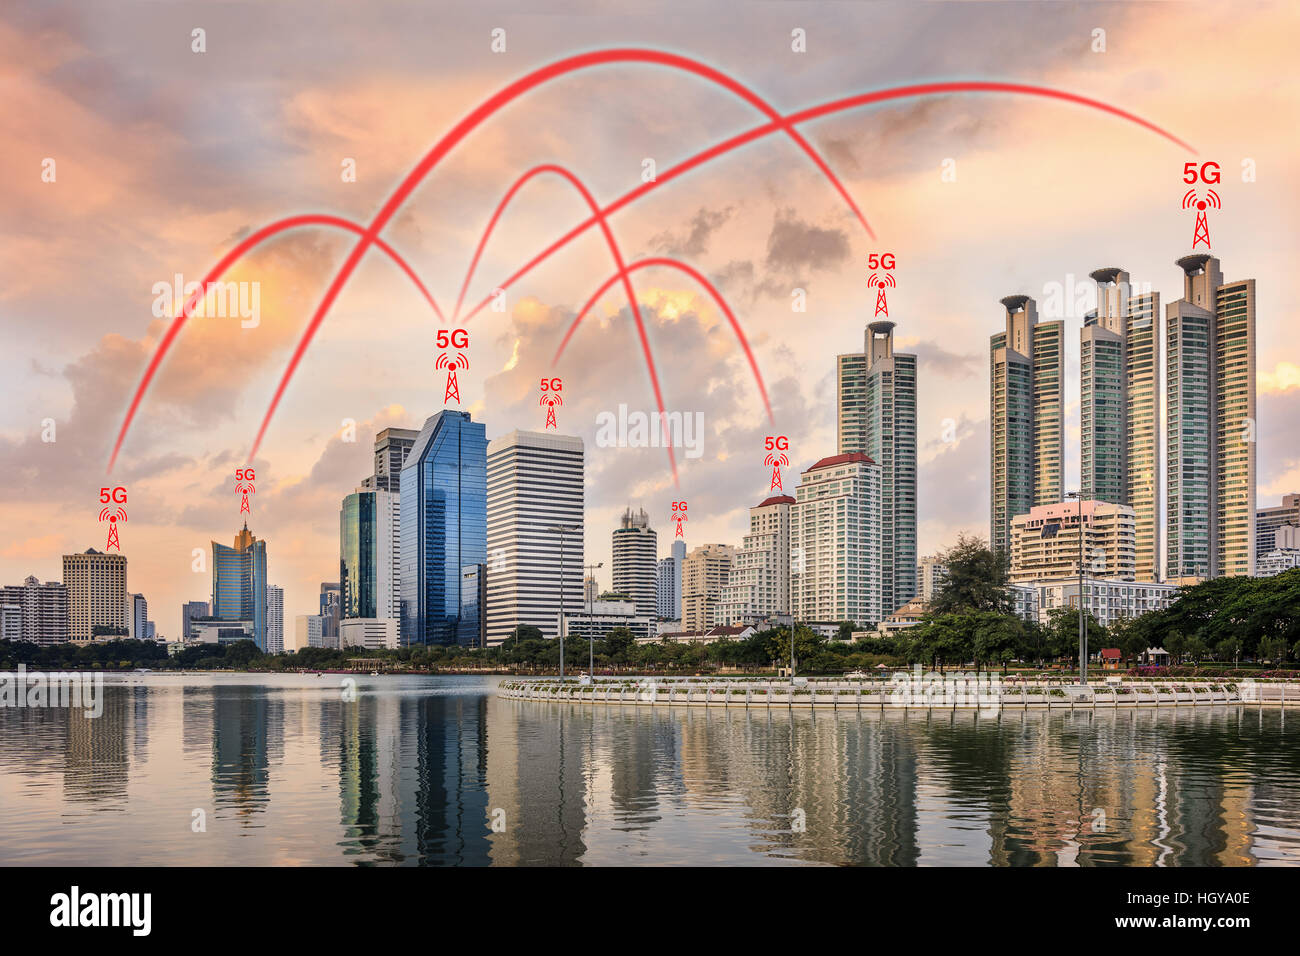 Concept of 5G network connection illustrated by smart city and buildings. Stock Photo